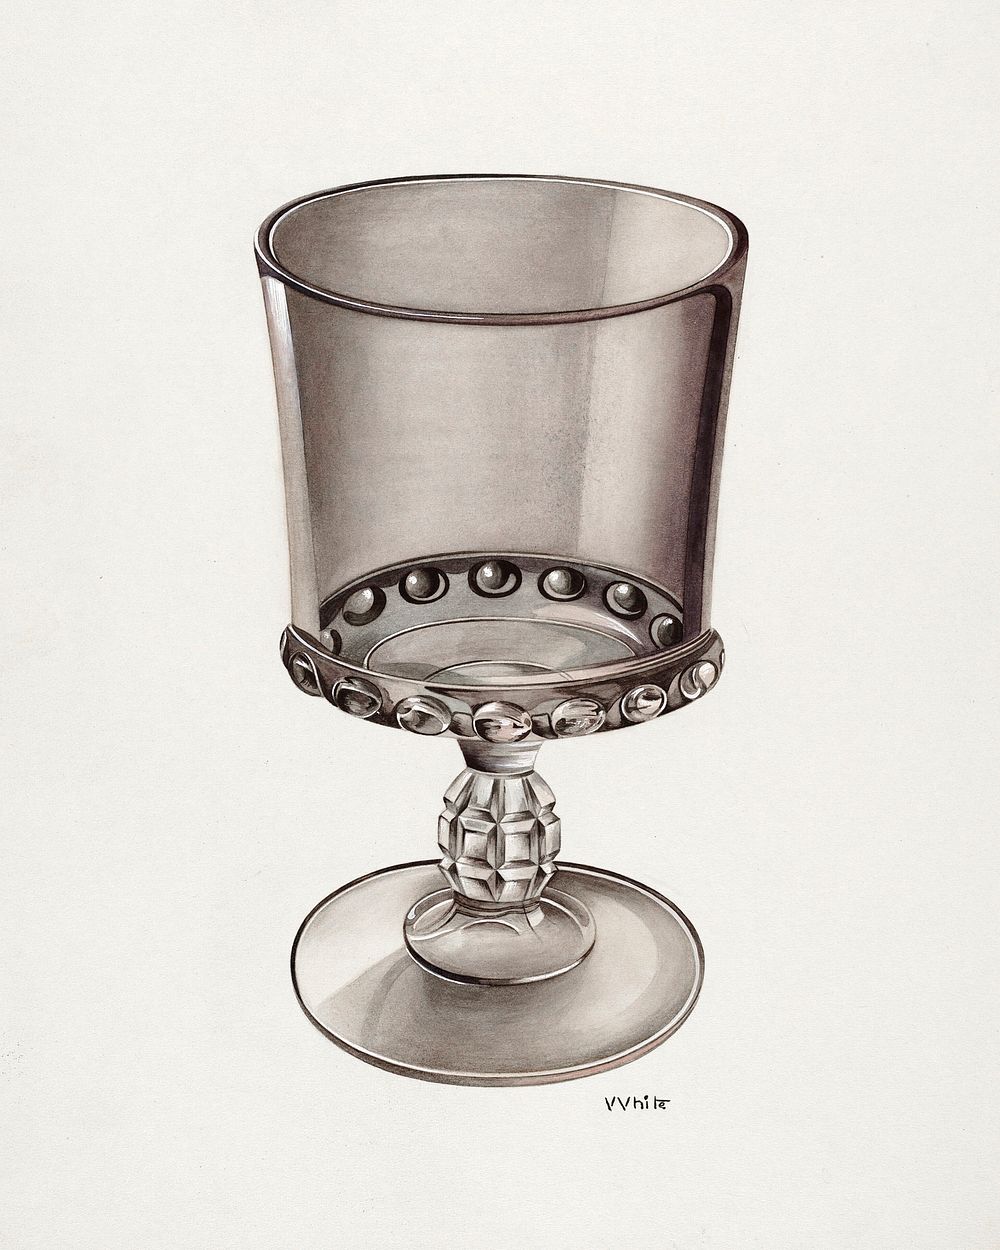 Spoon Holder (ca.1937) by Edward White. Original from The National Gallery of Art. Digitally enhanced by rawpixel.